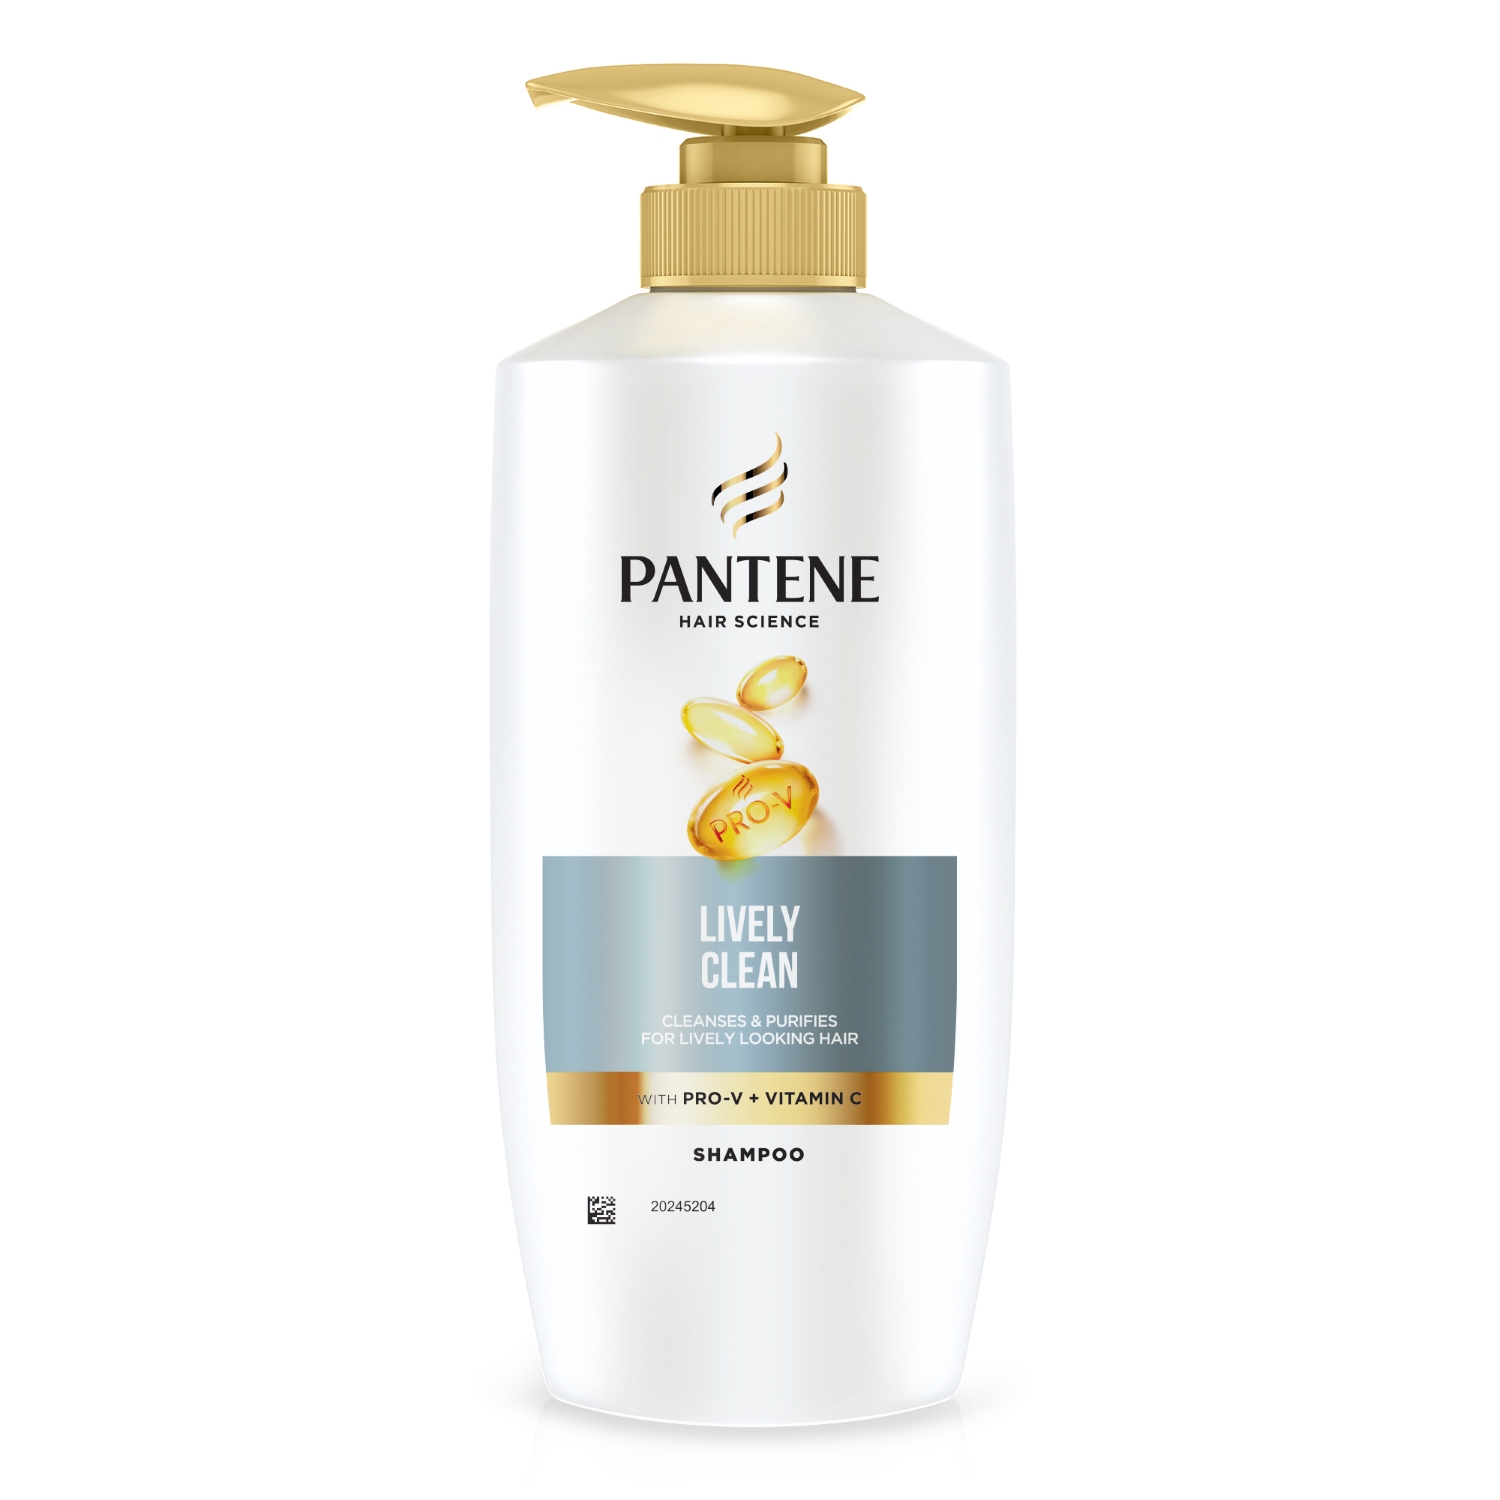 Pantene Advanced Hair Care Solution Shampoo - Lively Clean